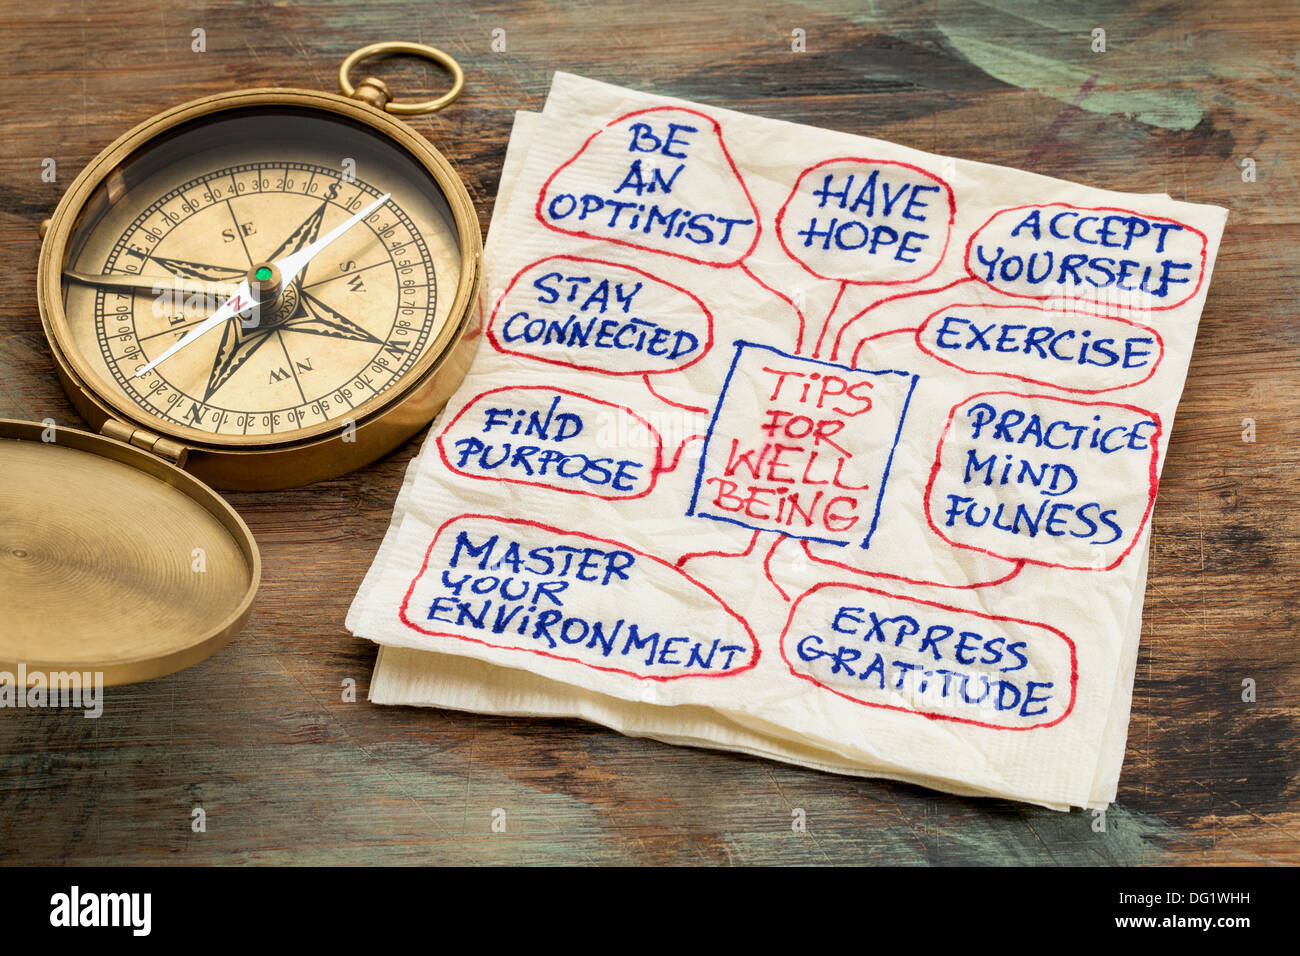 tips for well-being - a napkin doodle with a vintage brass compass Stock Photo